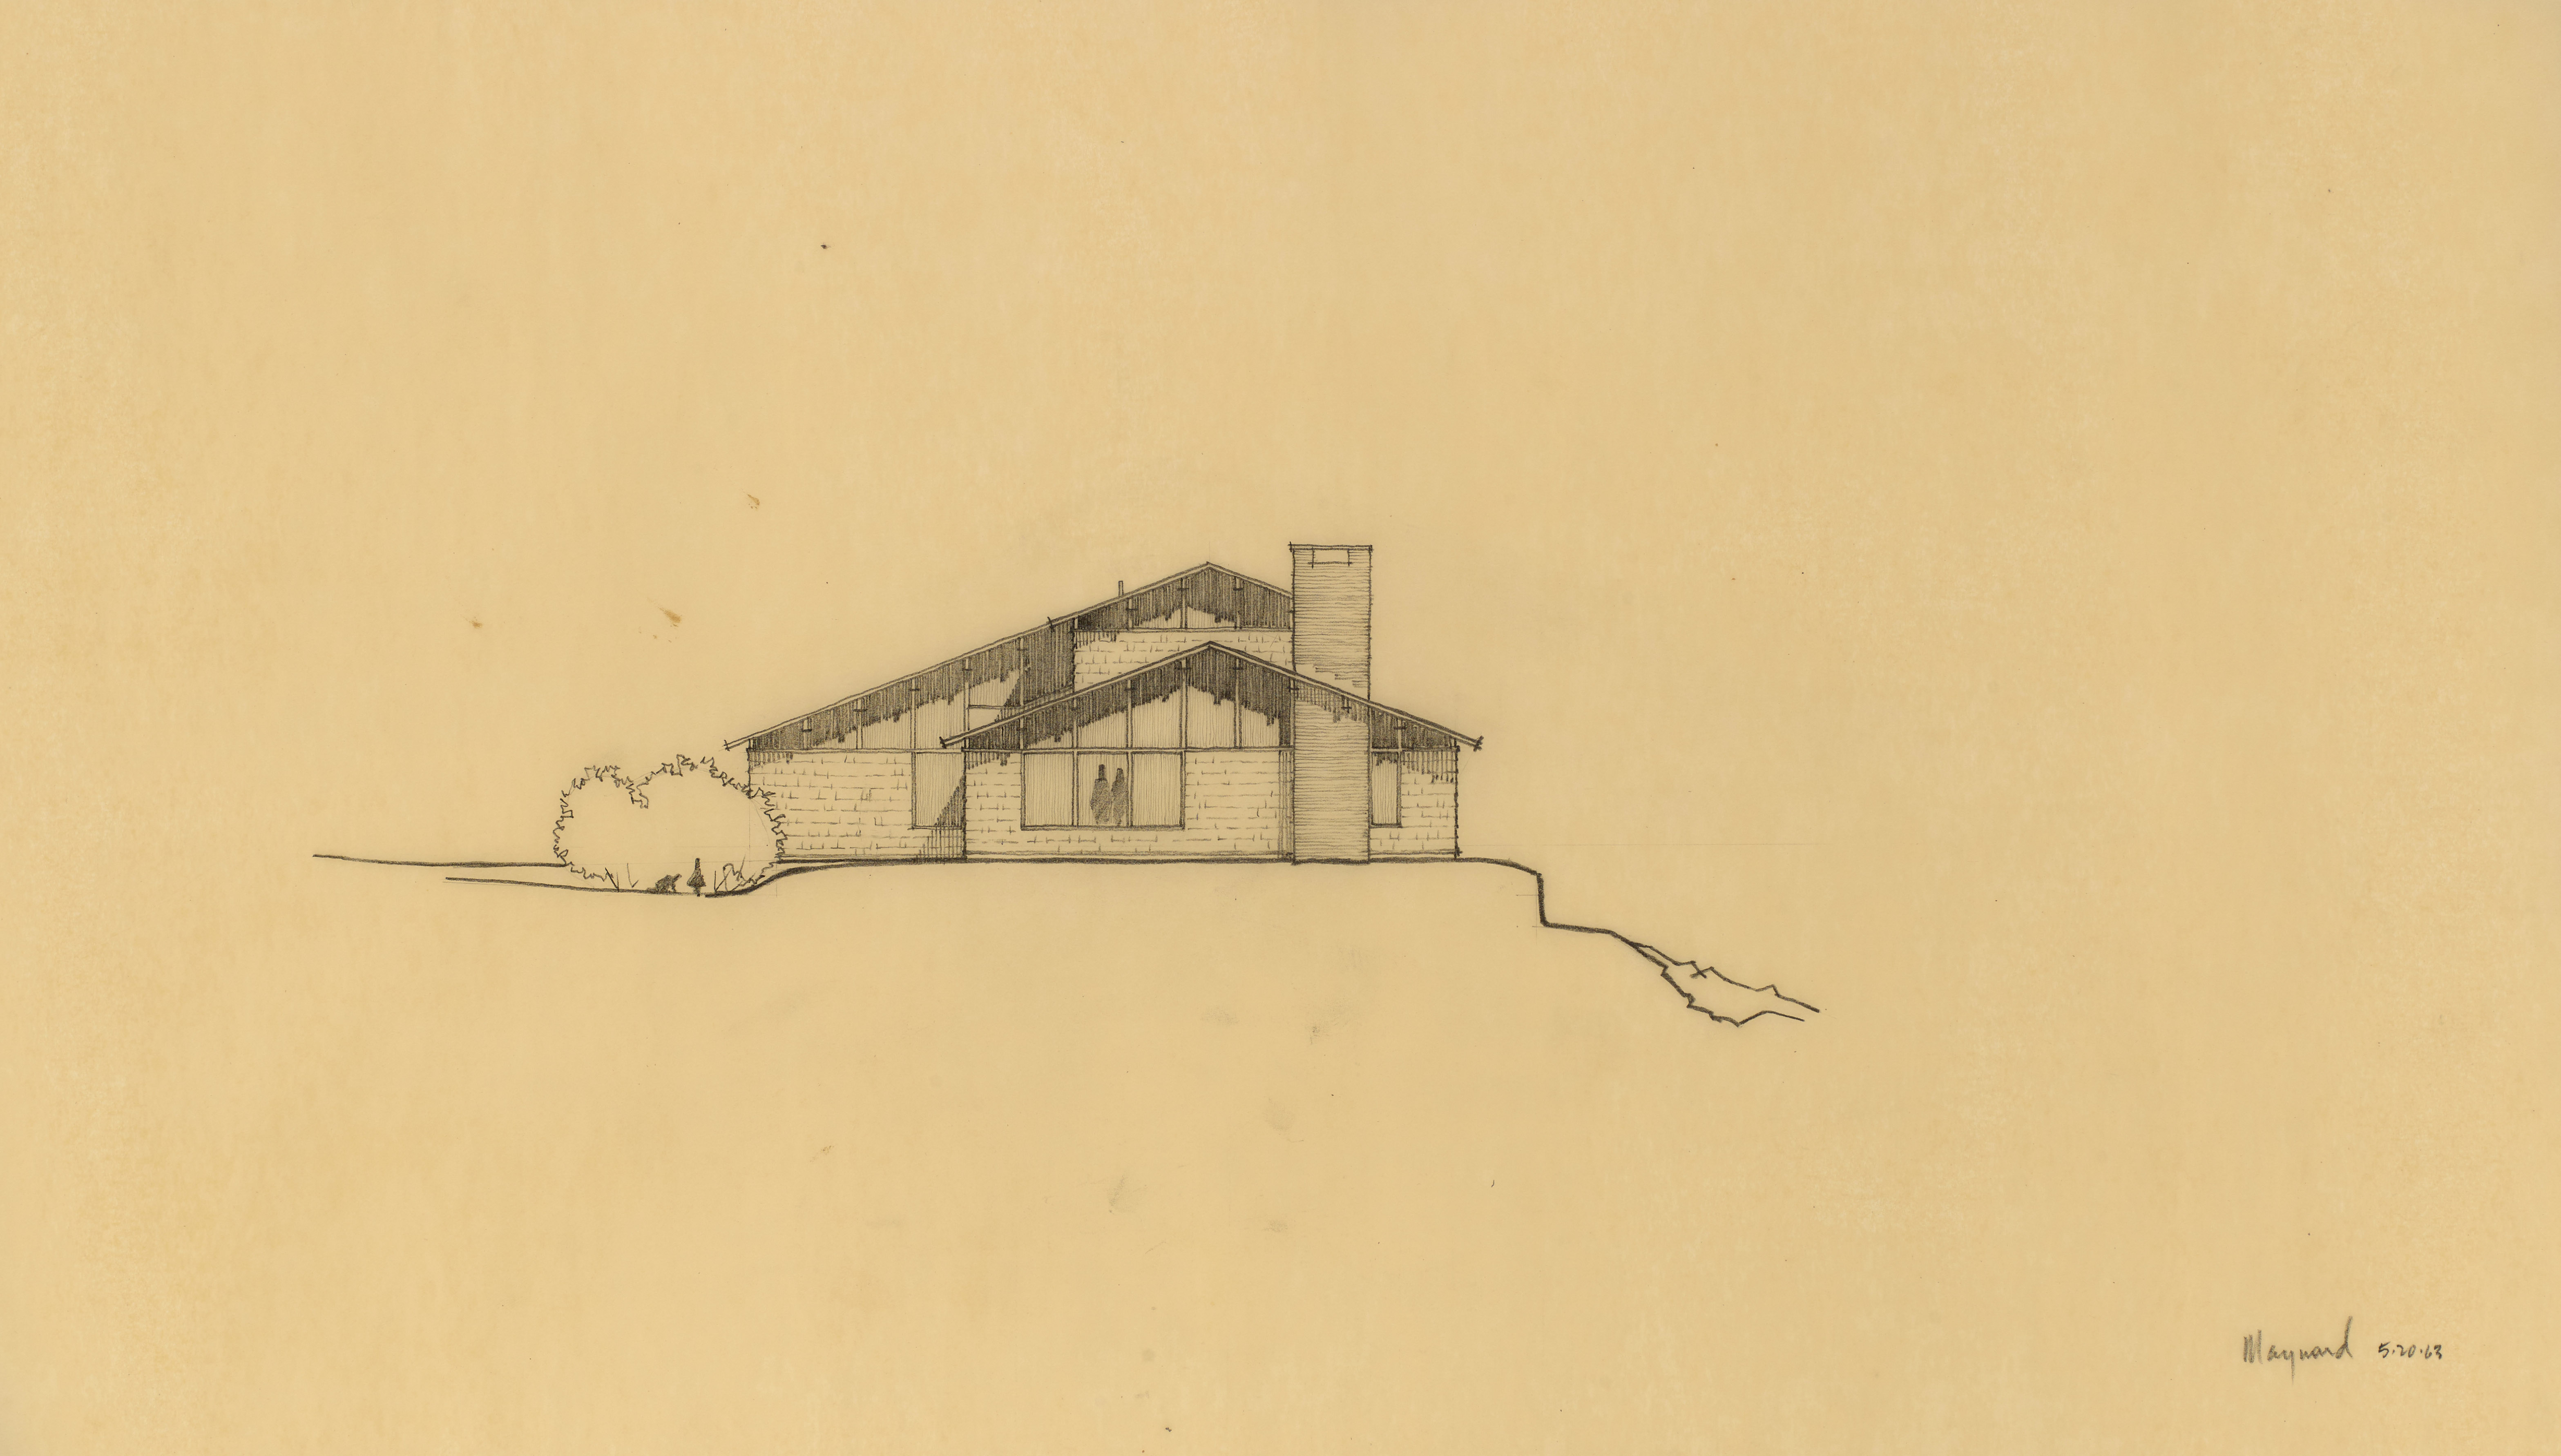 EPM Untitled West Elevation, 1963, graphite on tracing paper, 14 x 24 inches